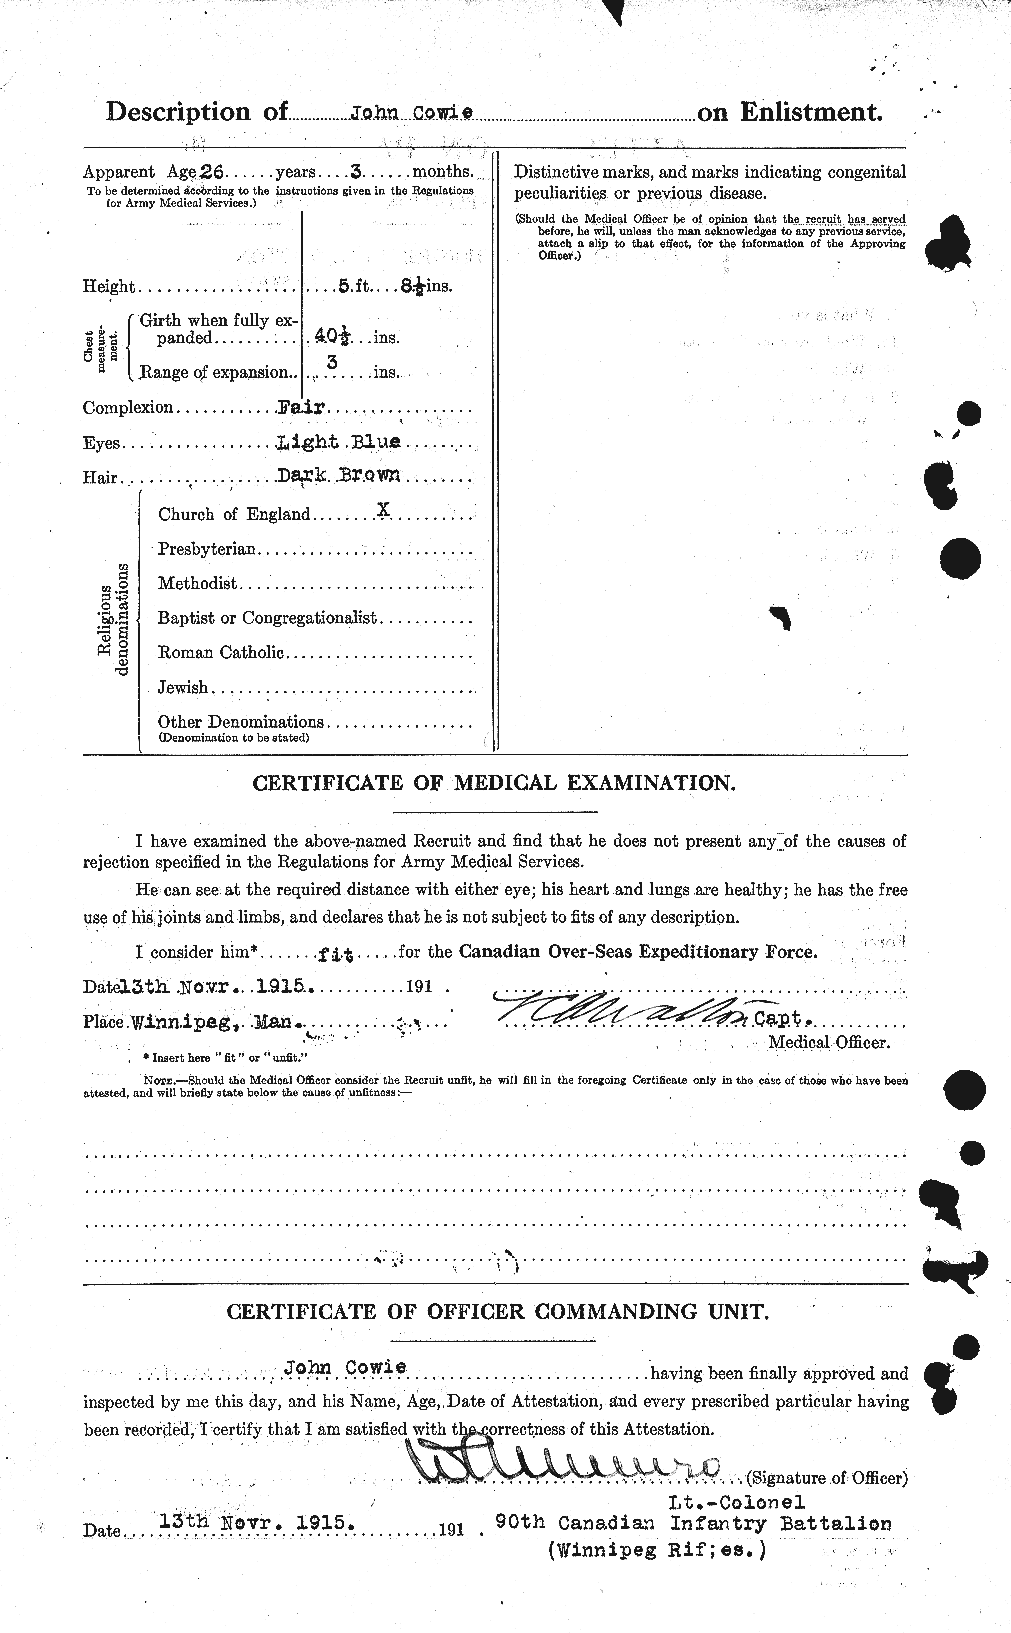 Personnel Records of the First World War - CEF 060007b